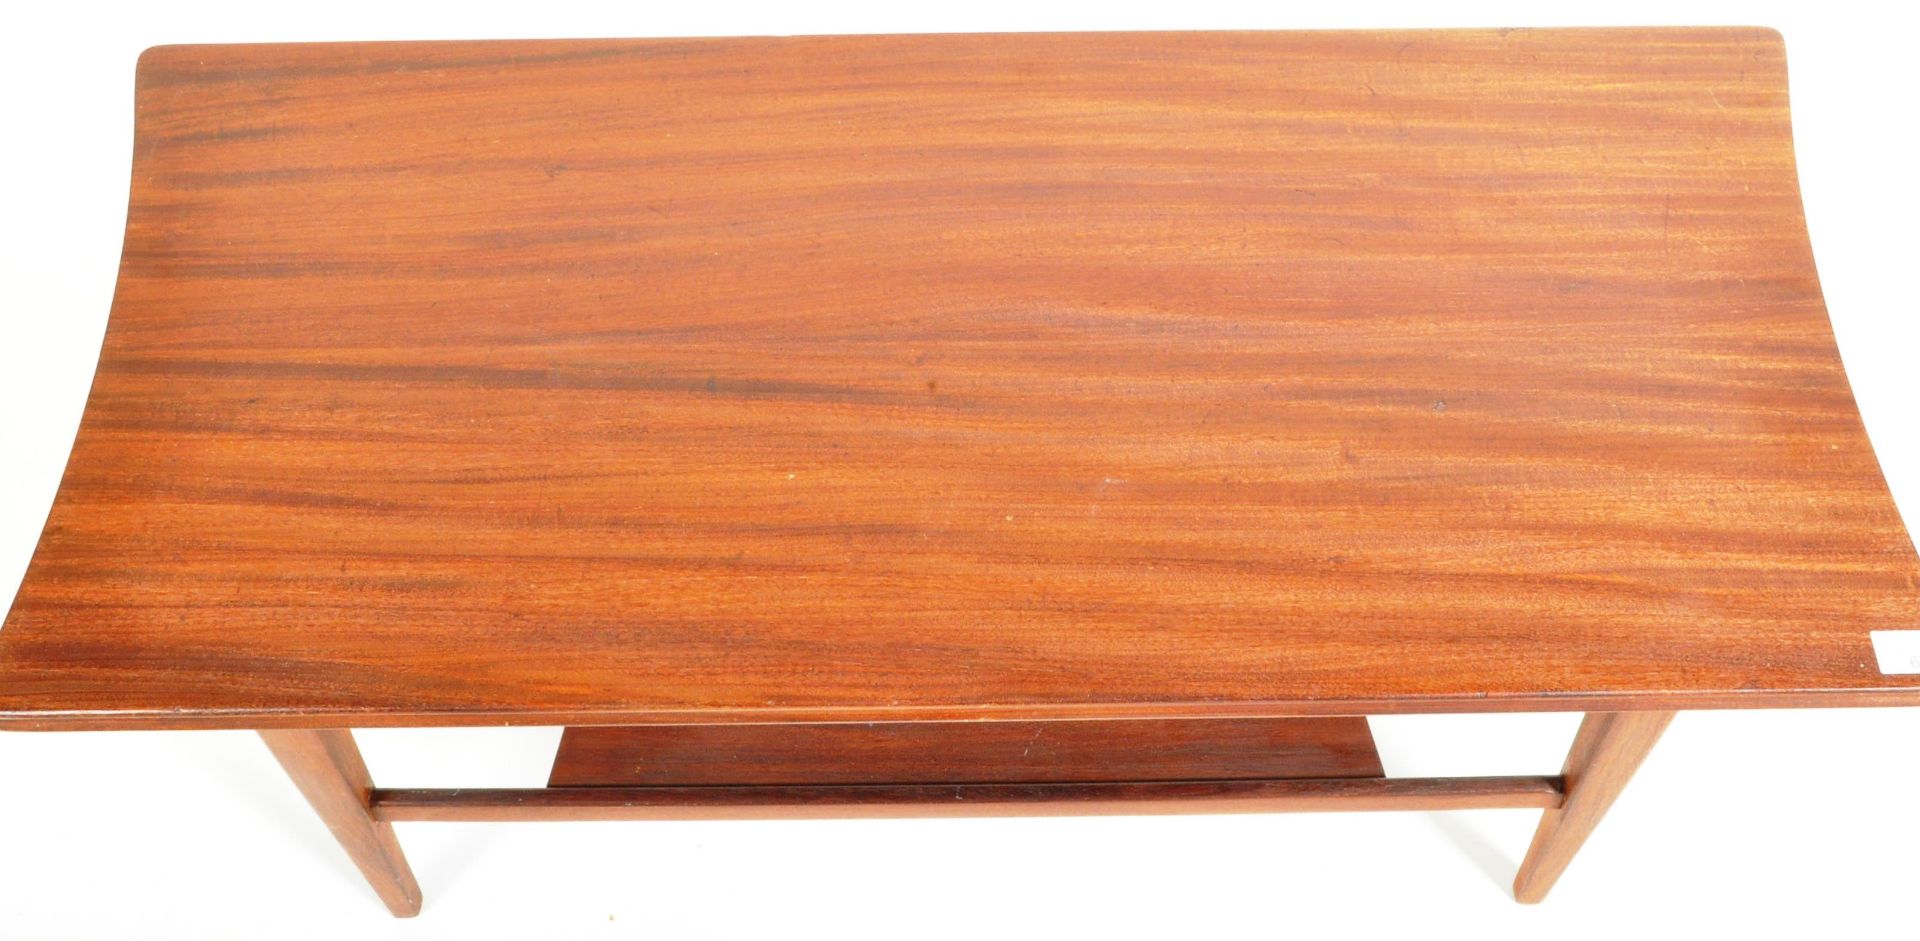 RICHARD HORNBY FOR FYNE LADYE MID CENTURY COFFEE TABLE - Image 4 of 5